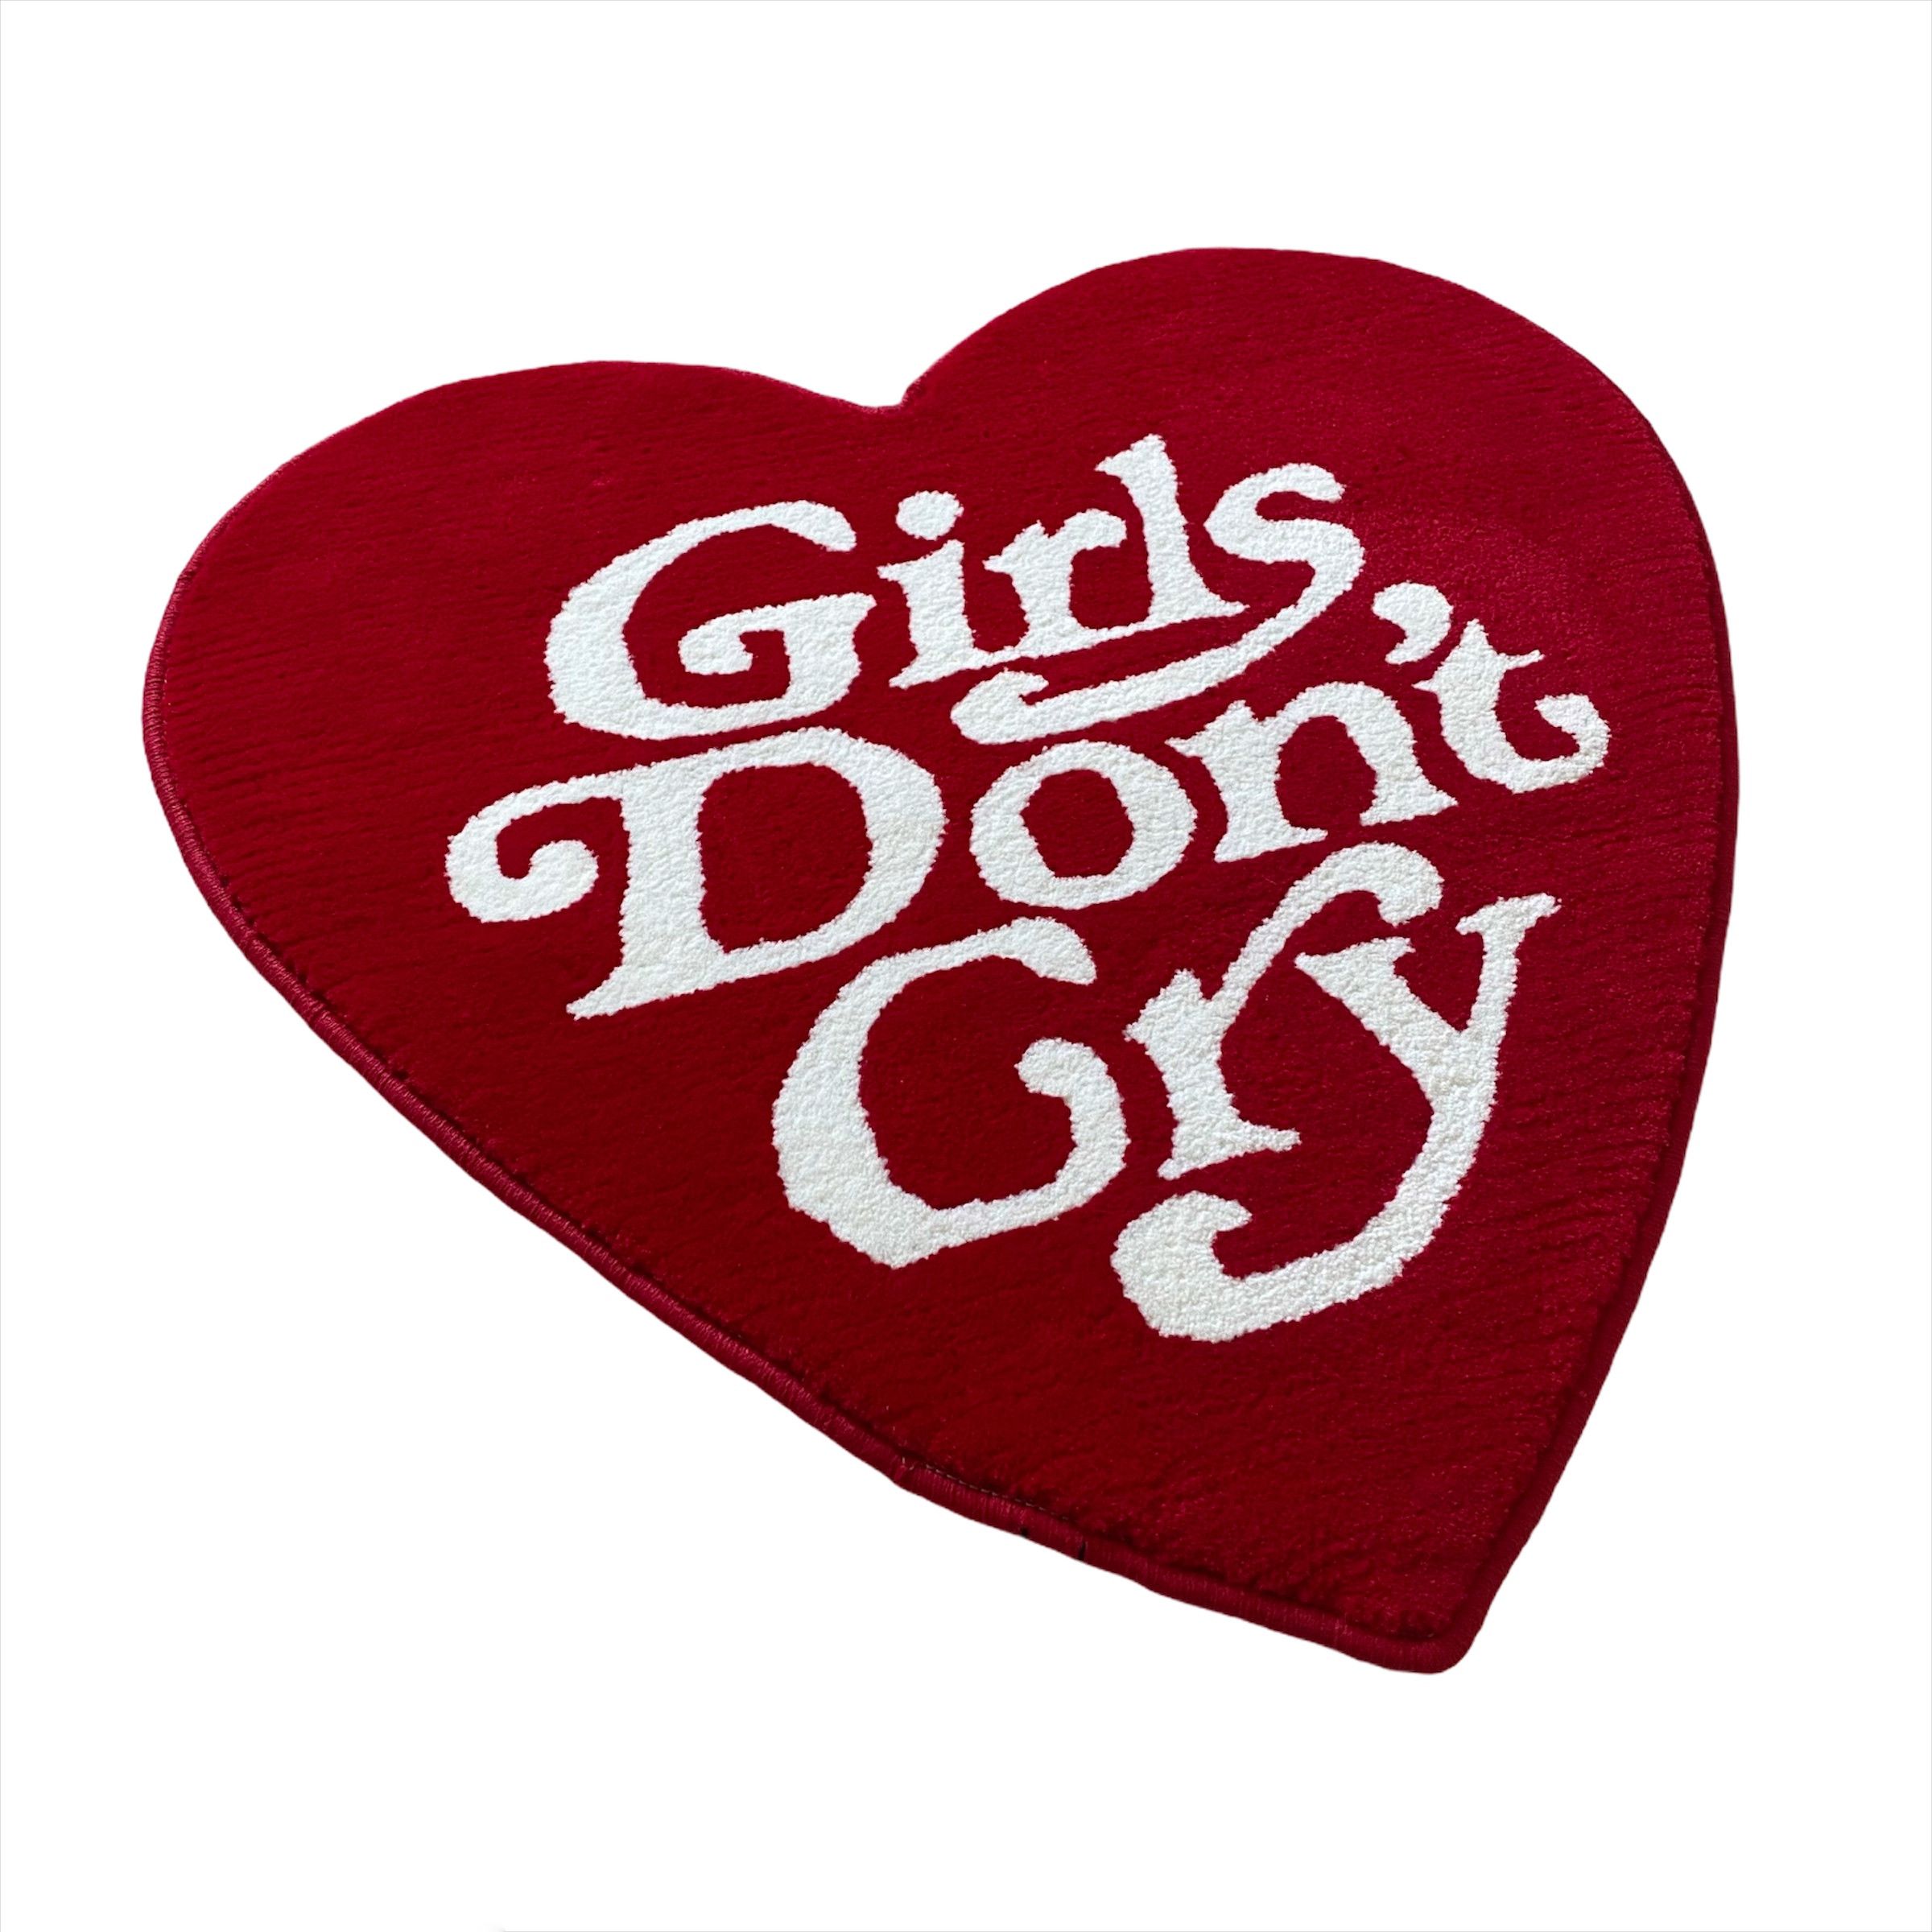 Girls Dont Cry Girls Don't Cry Heart Shape Rug verdy | Grailed